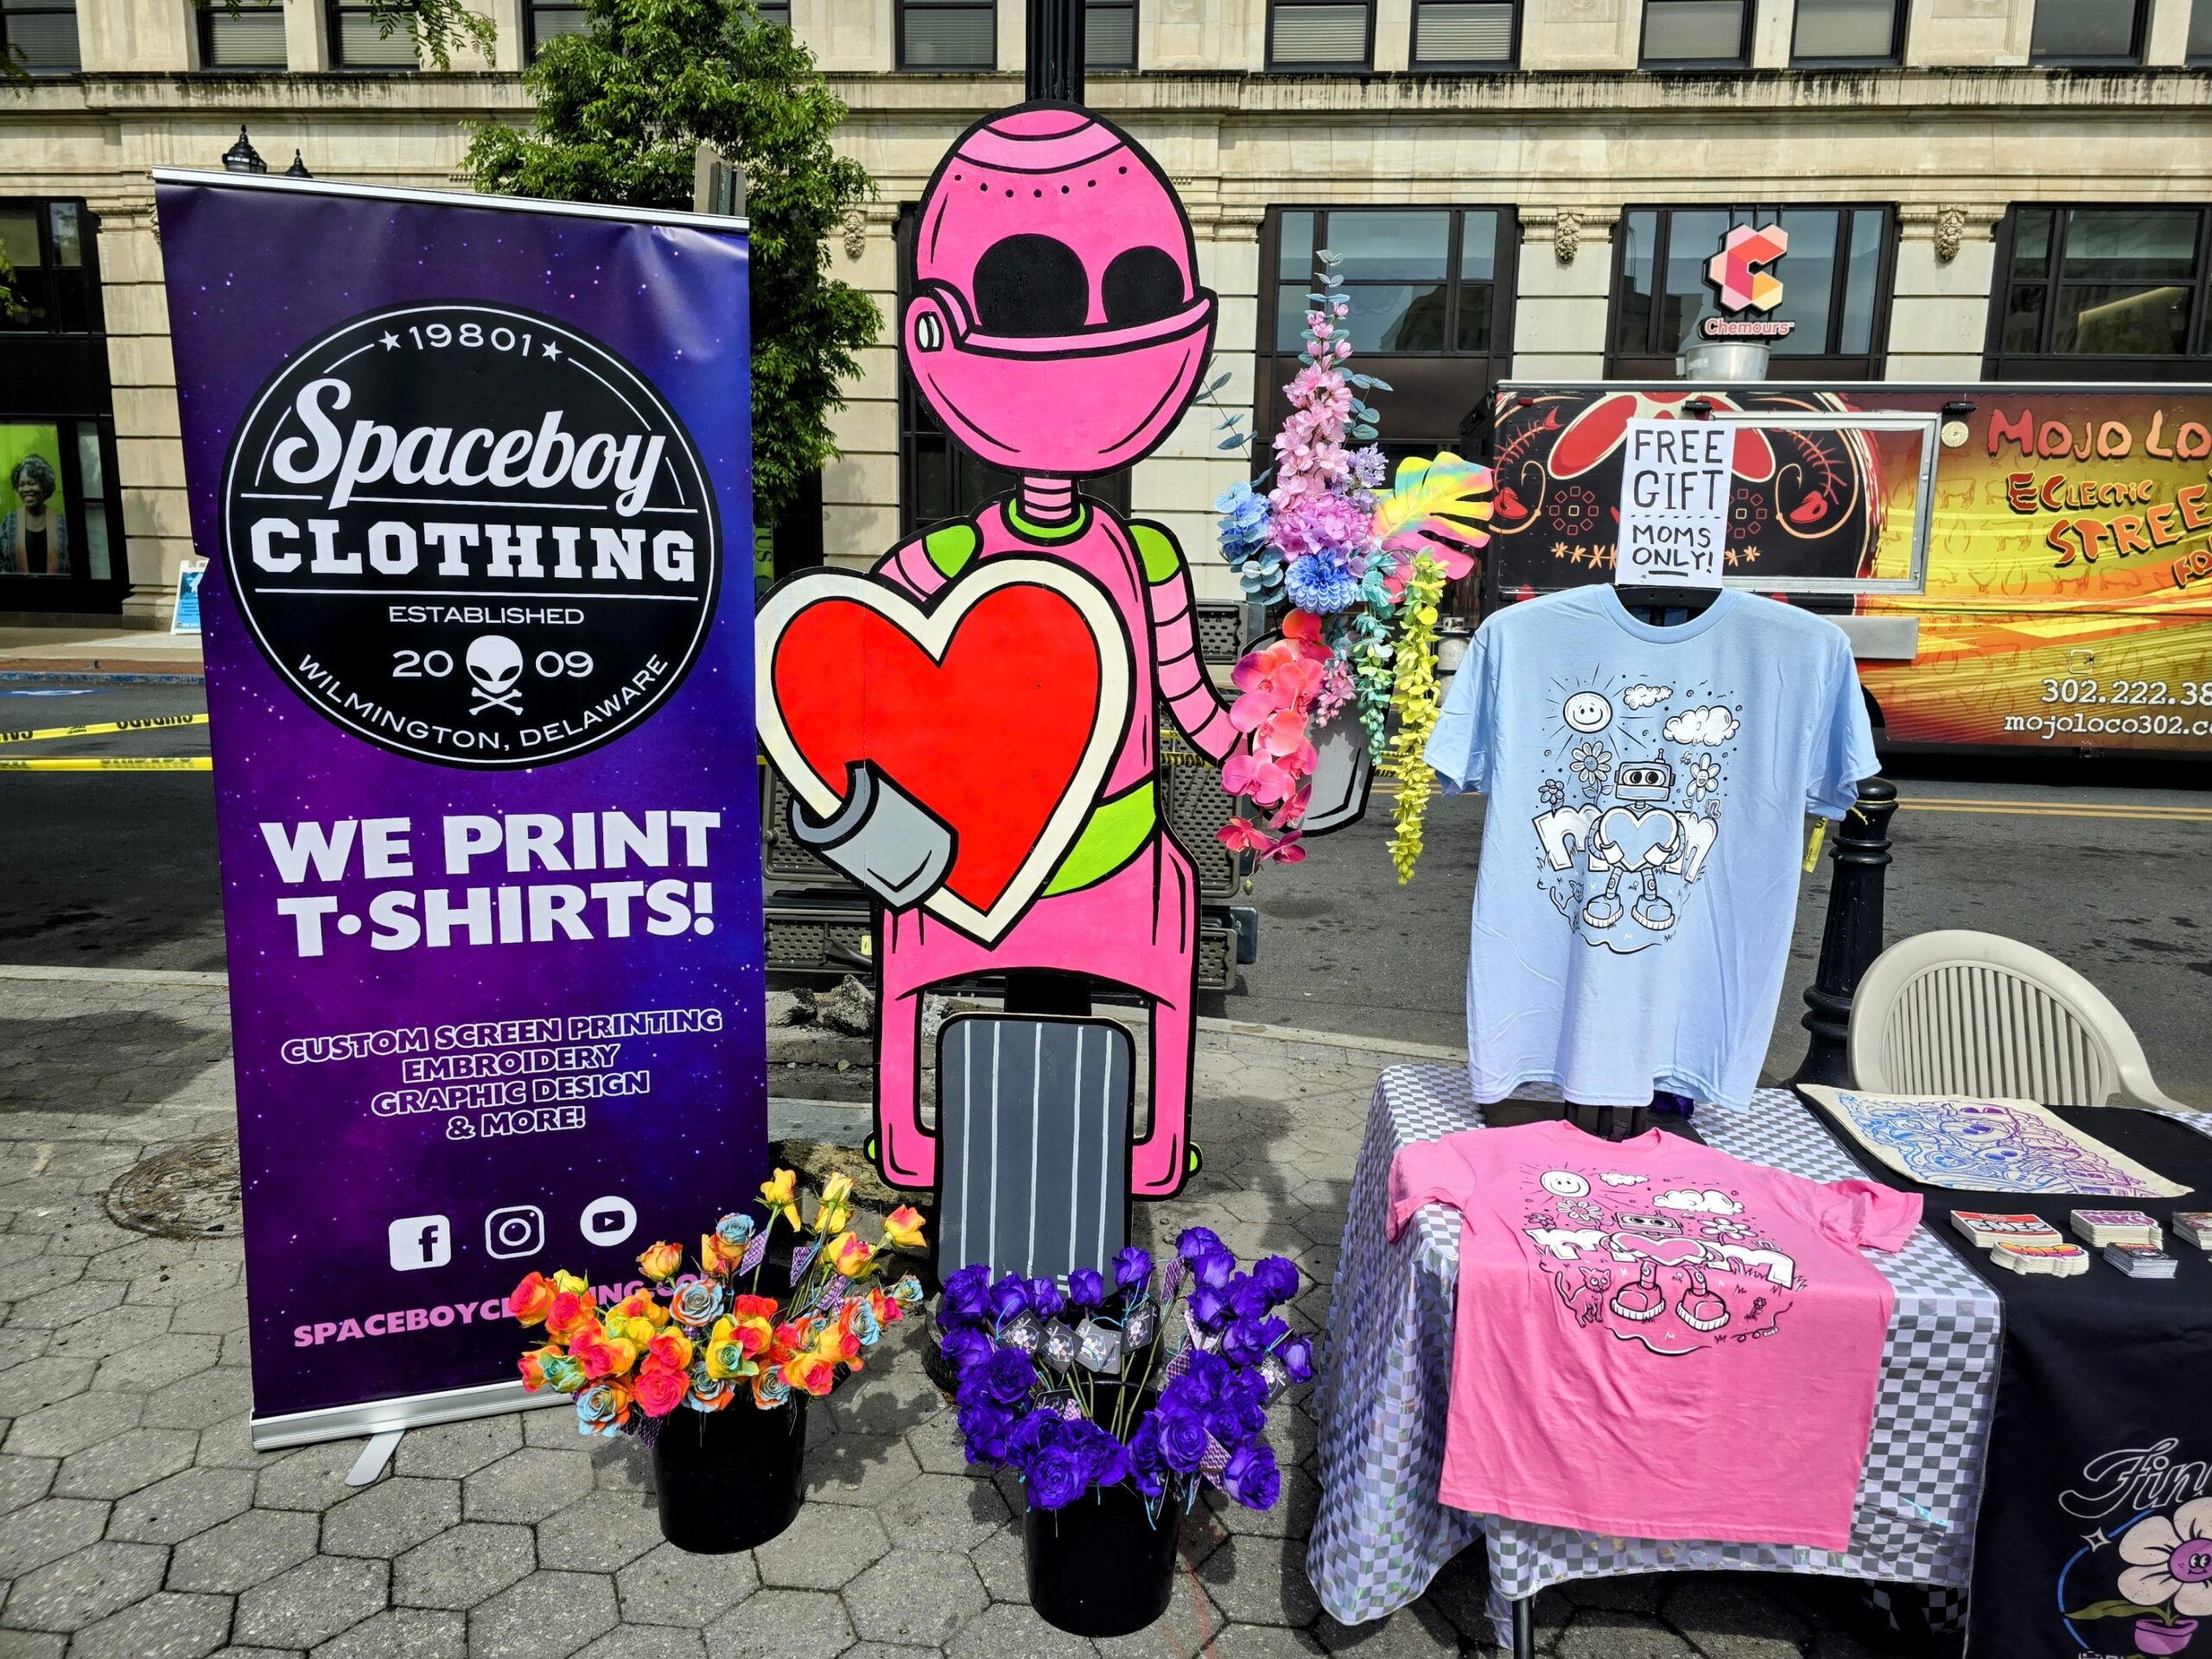 A street vendor booth with a banner for spaceboy clothing, featuring a large pink robot cutout, assorted t-shirts on display, and flower decorations.